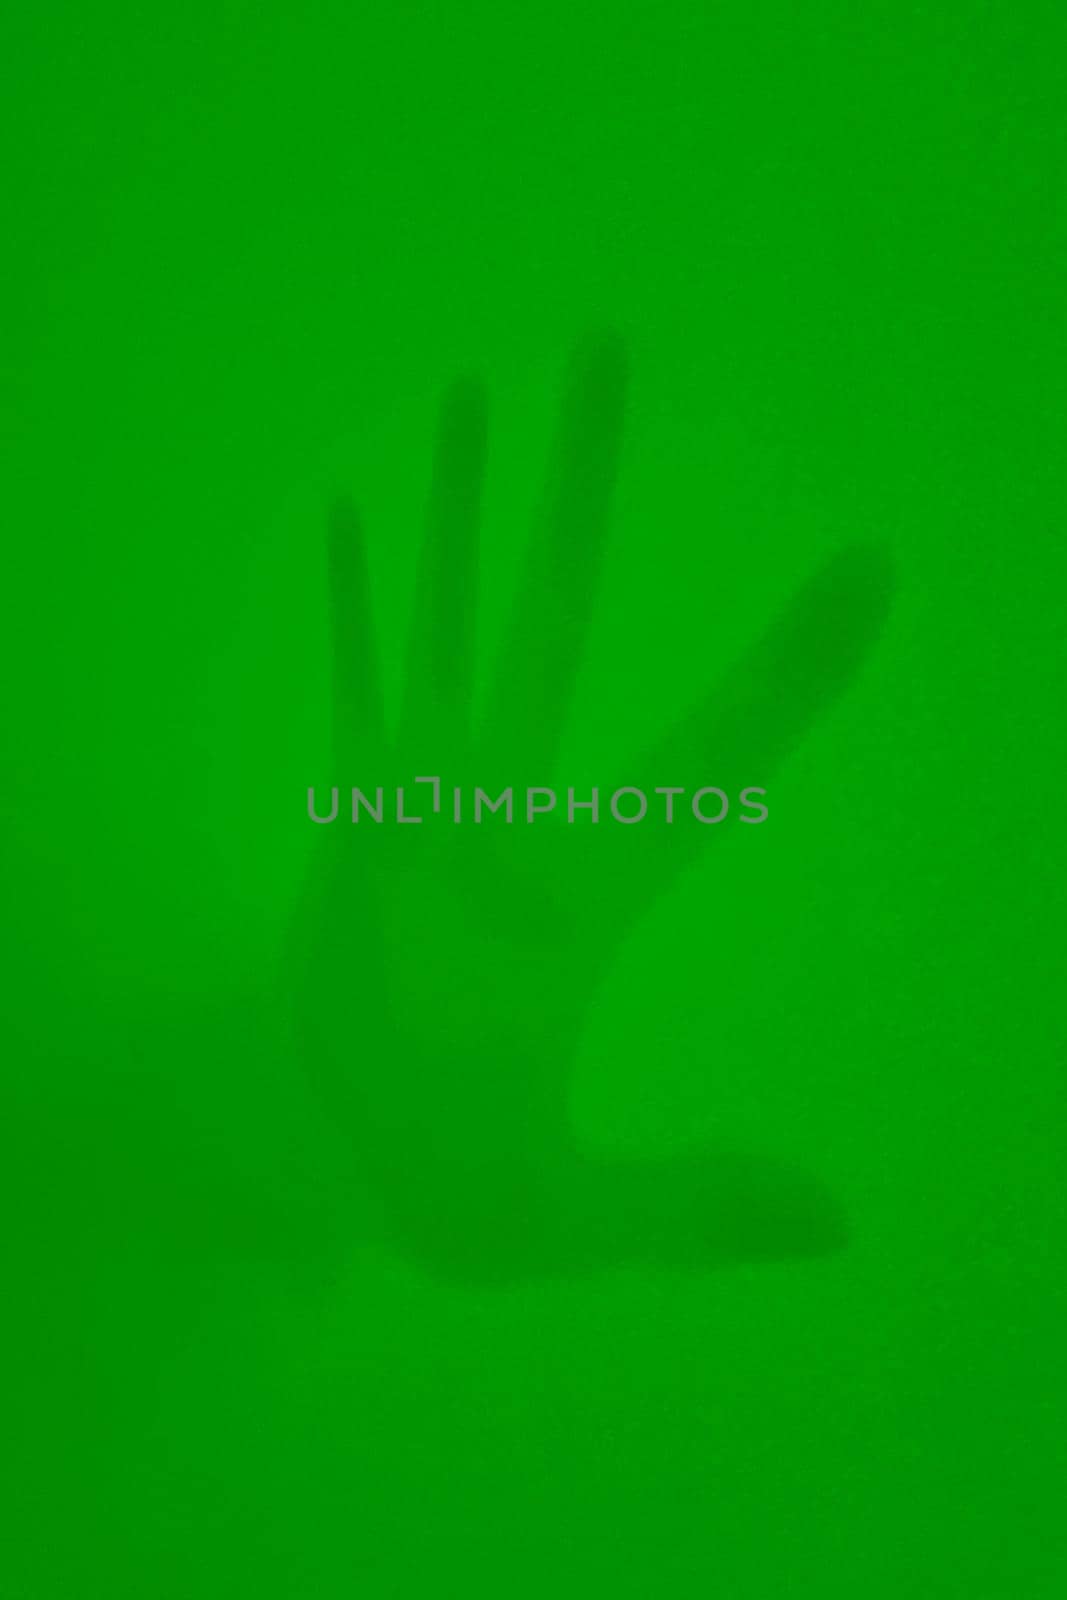 On a green background, the shadow of a man's hand